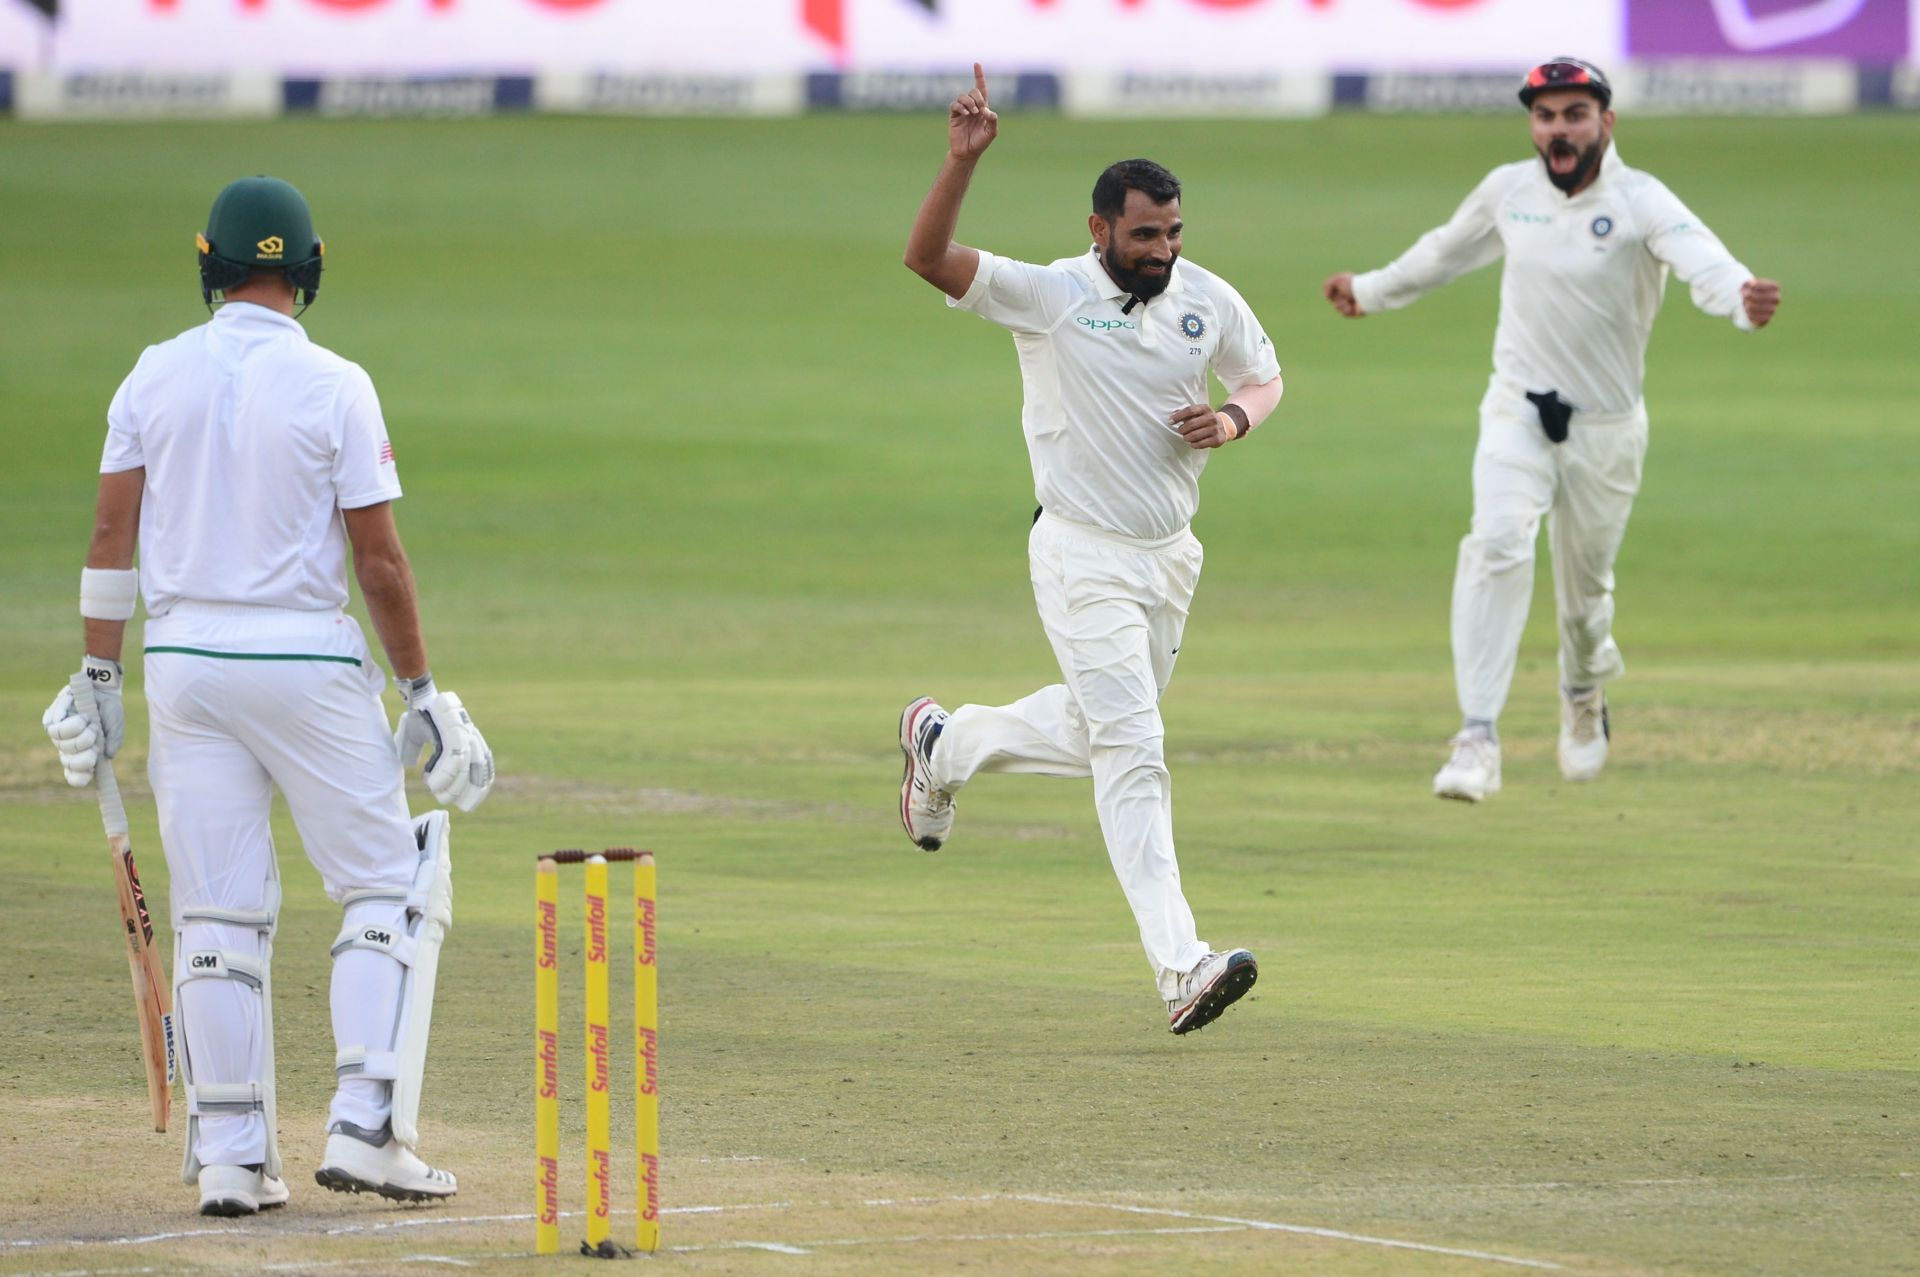 All eyes will be on Mohammed Shami during the India vs South Africa Test series